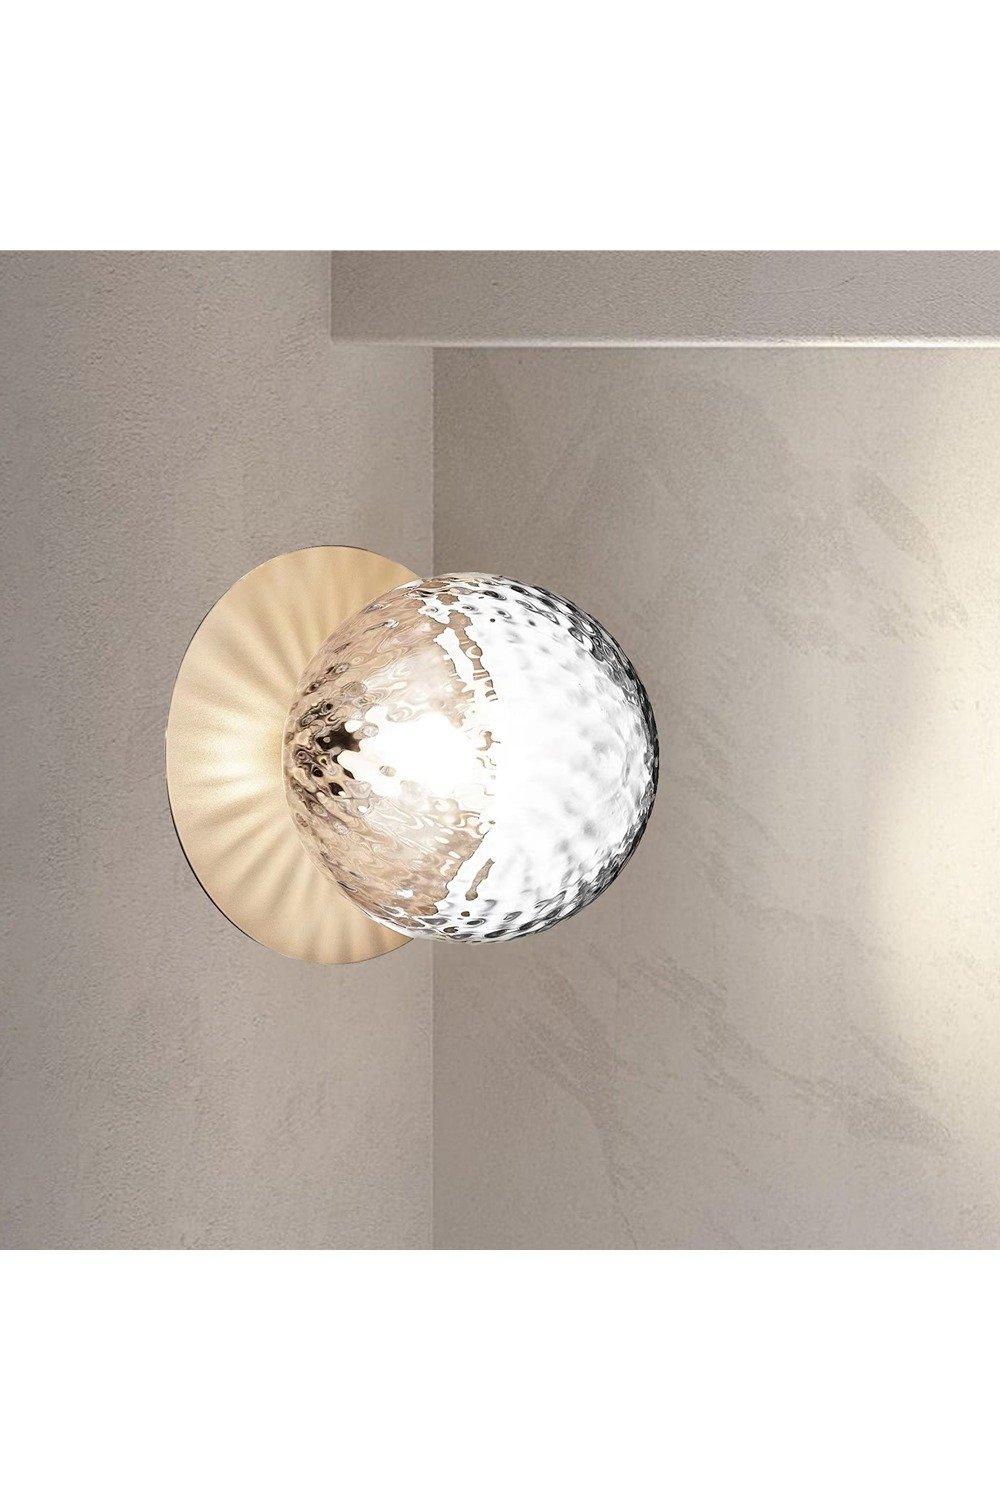 'Dixon' Brushed Gold and Clear Glass Globe Diffuser Wall or Ceiling Light